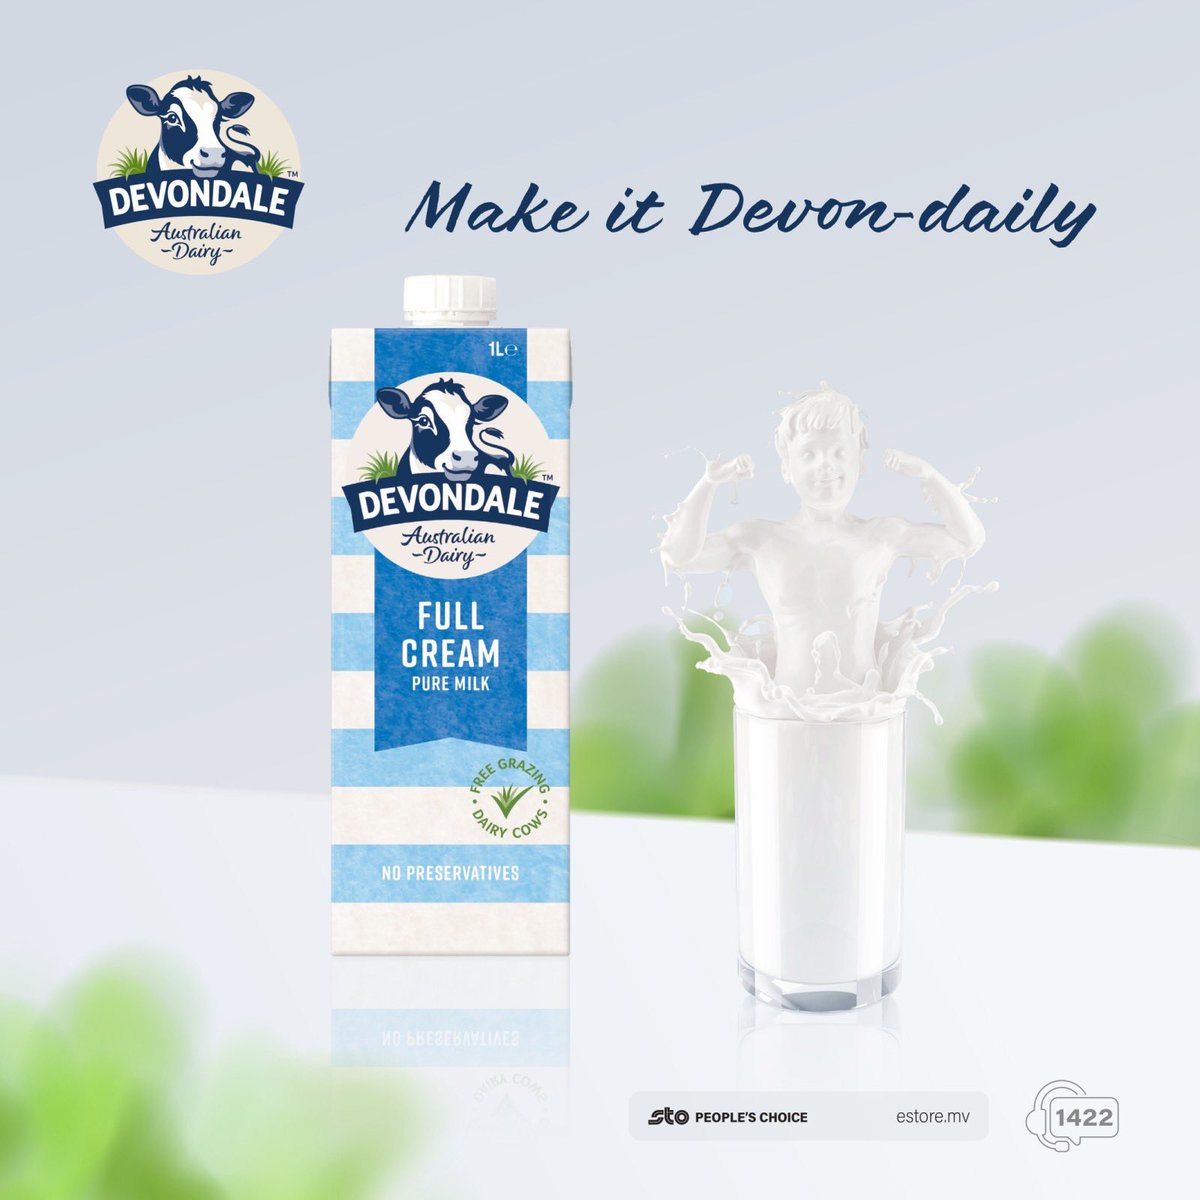 #Devondale Full Cream Milk is packed with essential nutrients that helps to keep kids #Healthy & #Active for longer!

📍STO People's Choice 
#DairyGoodness #Devondaily 🍃